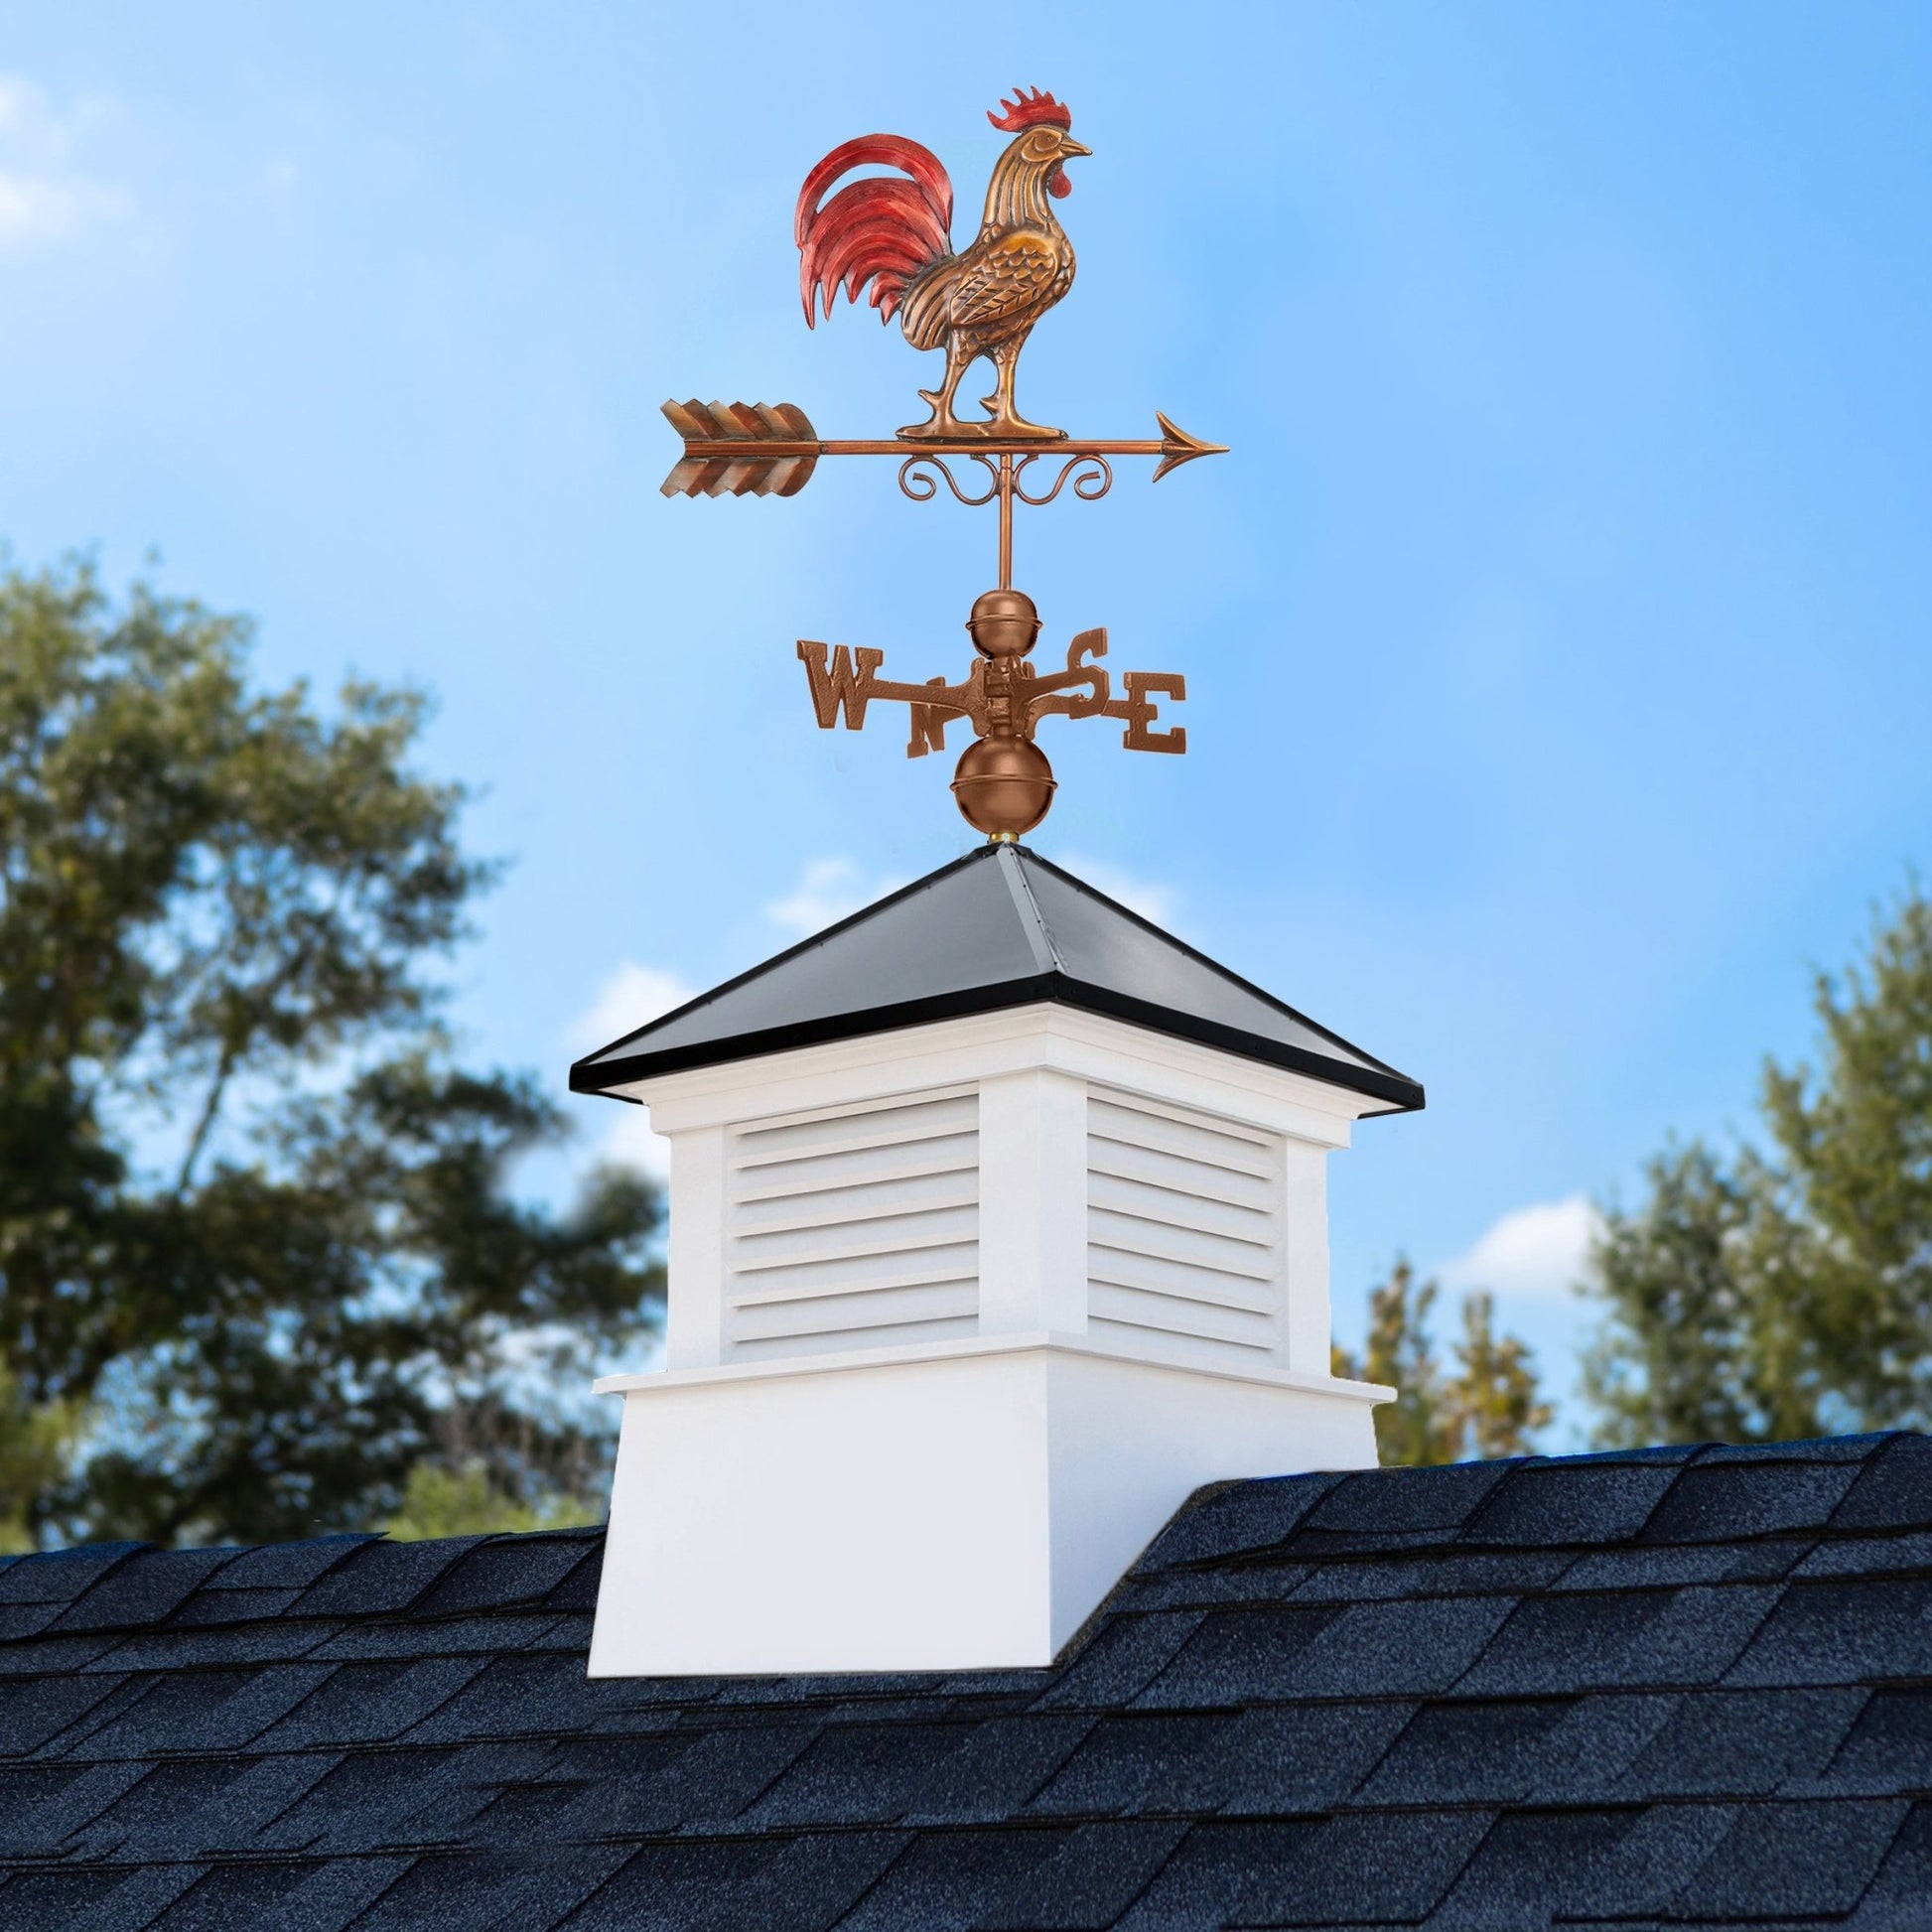 18" Square Manchester Vinyl Cupola with Black Aluminum roof and Copper Bantam Red Rooster Weathervane - Good Directions